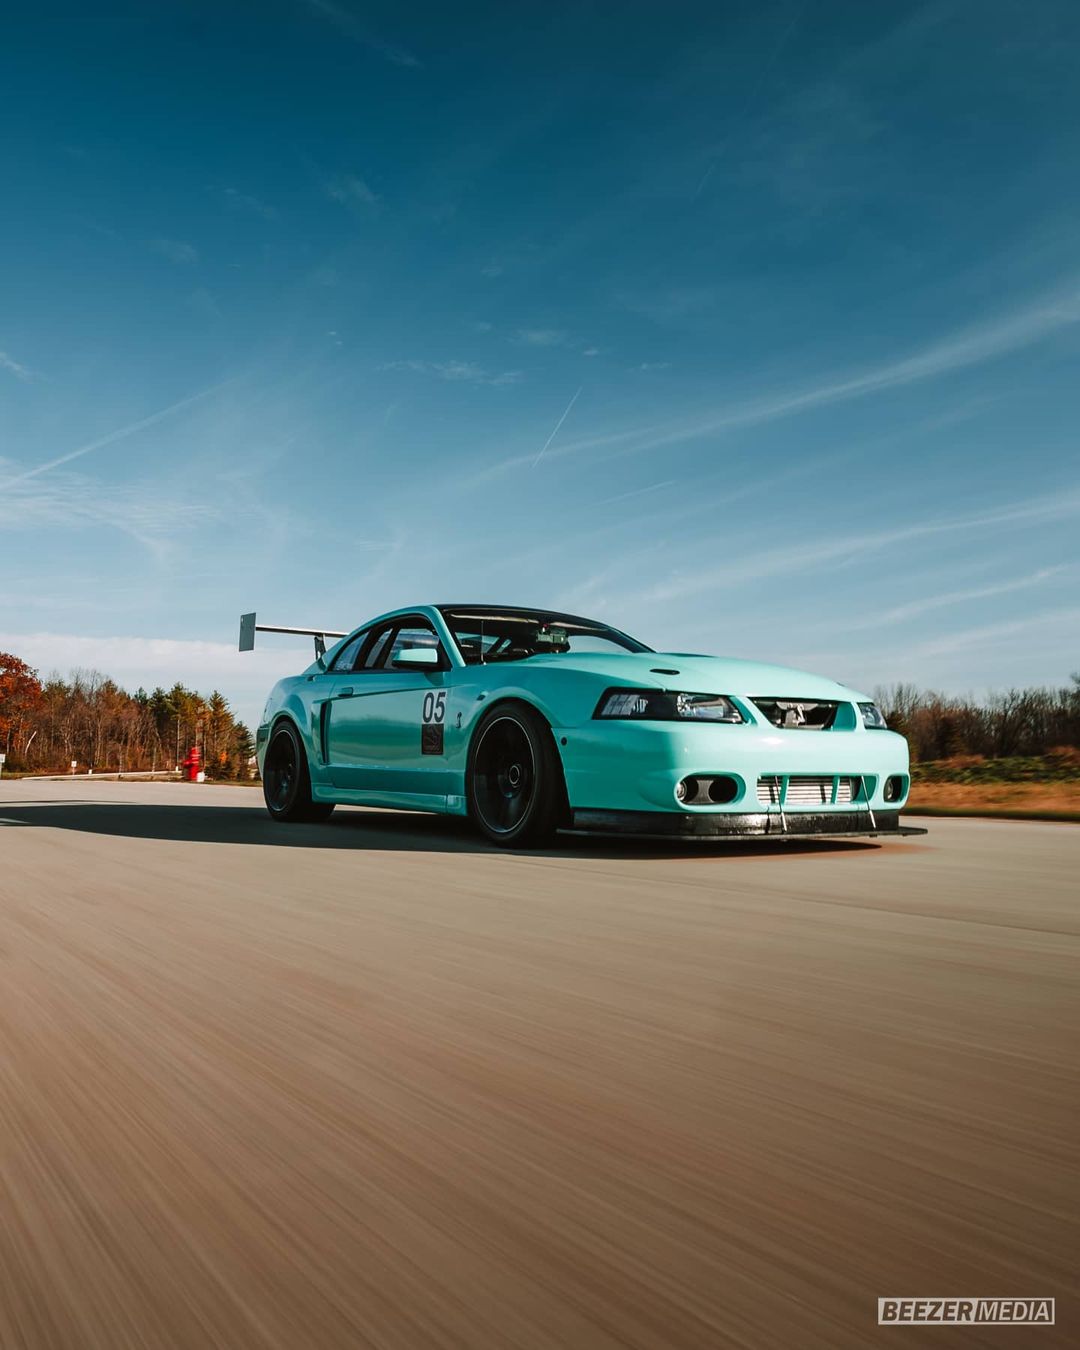 SN95 Ford Mustang Cobra terminator at the race track